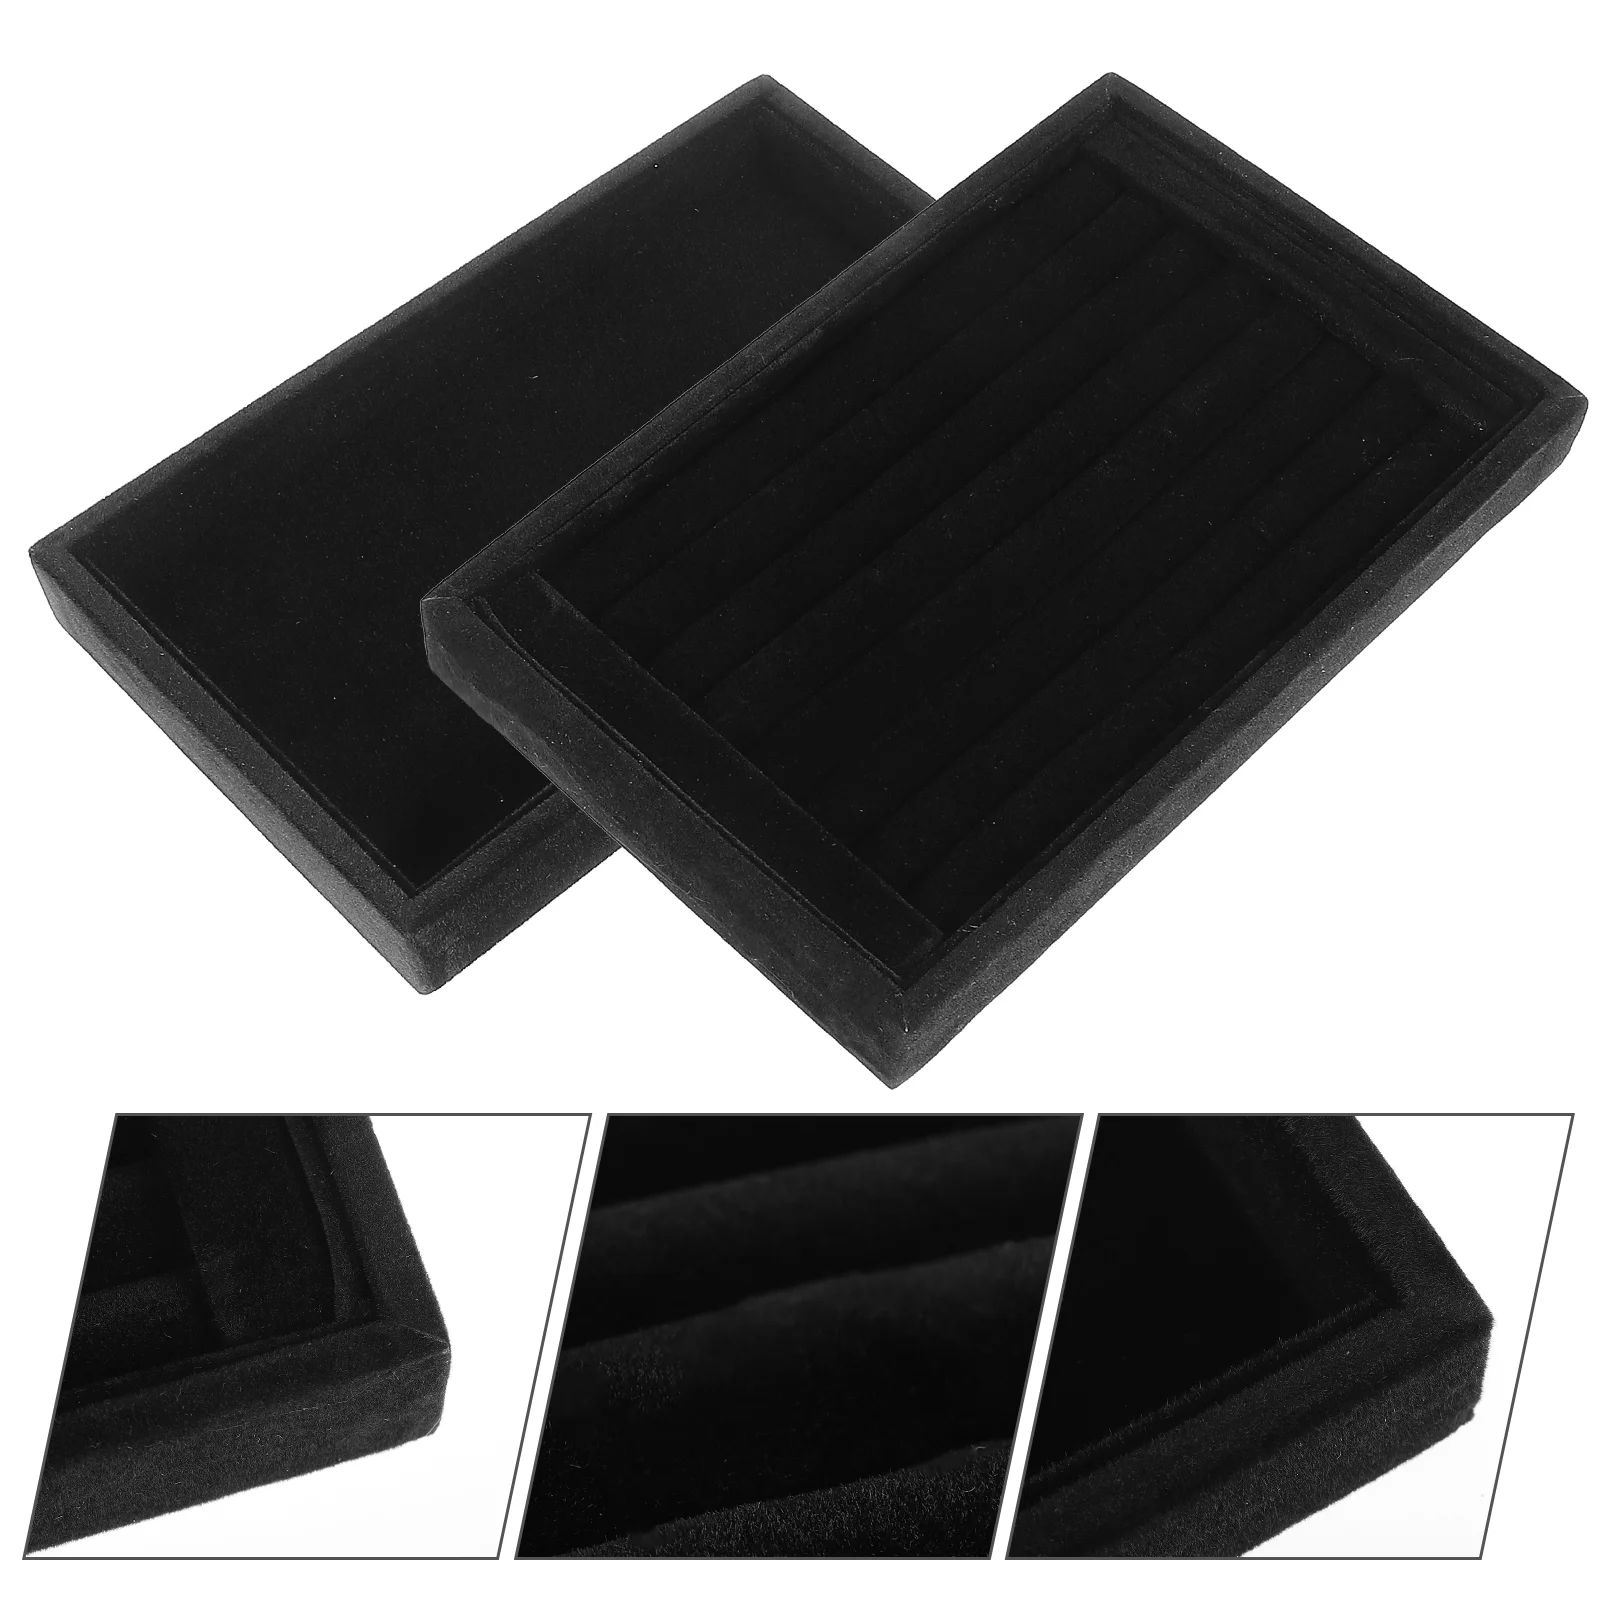 2 Pcs Suede Jewelry Tray Ornament Storage Box Earring Stud Organizer Display Stand